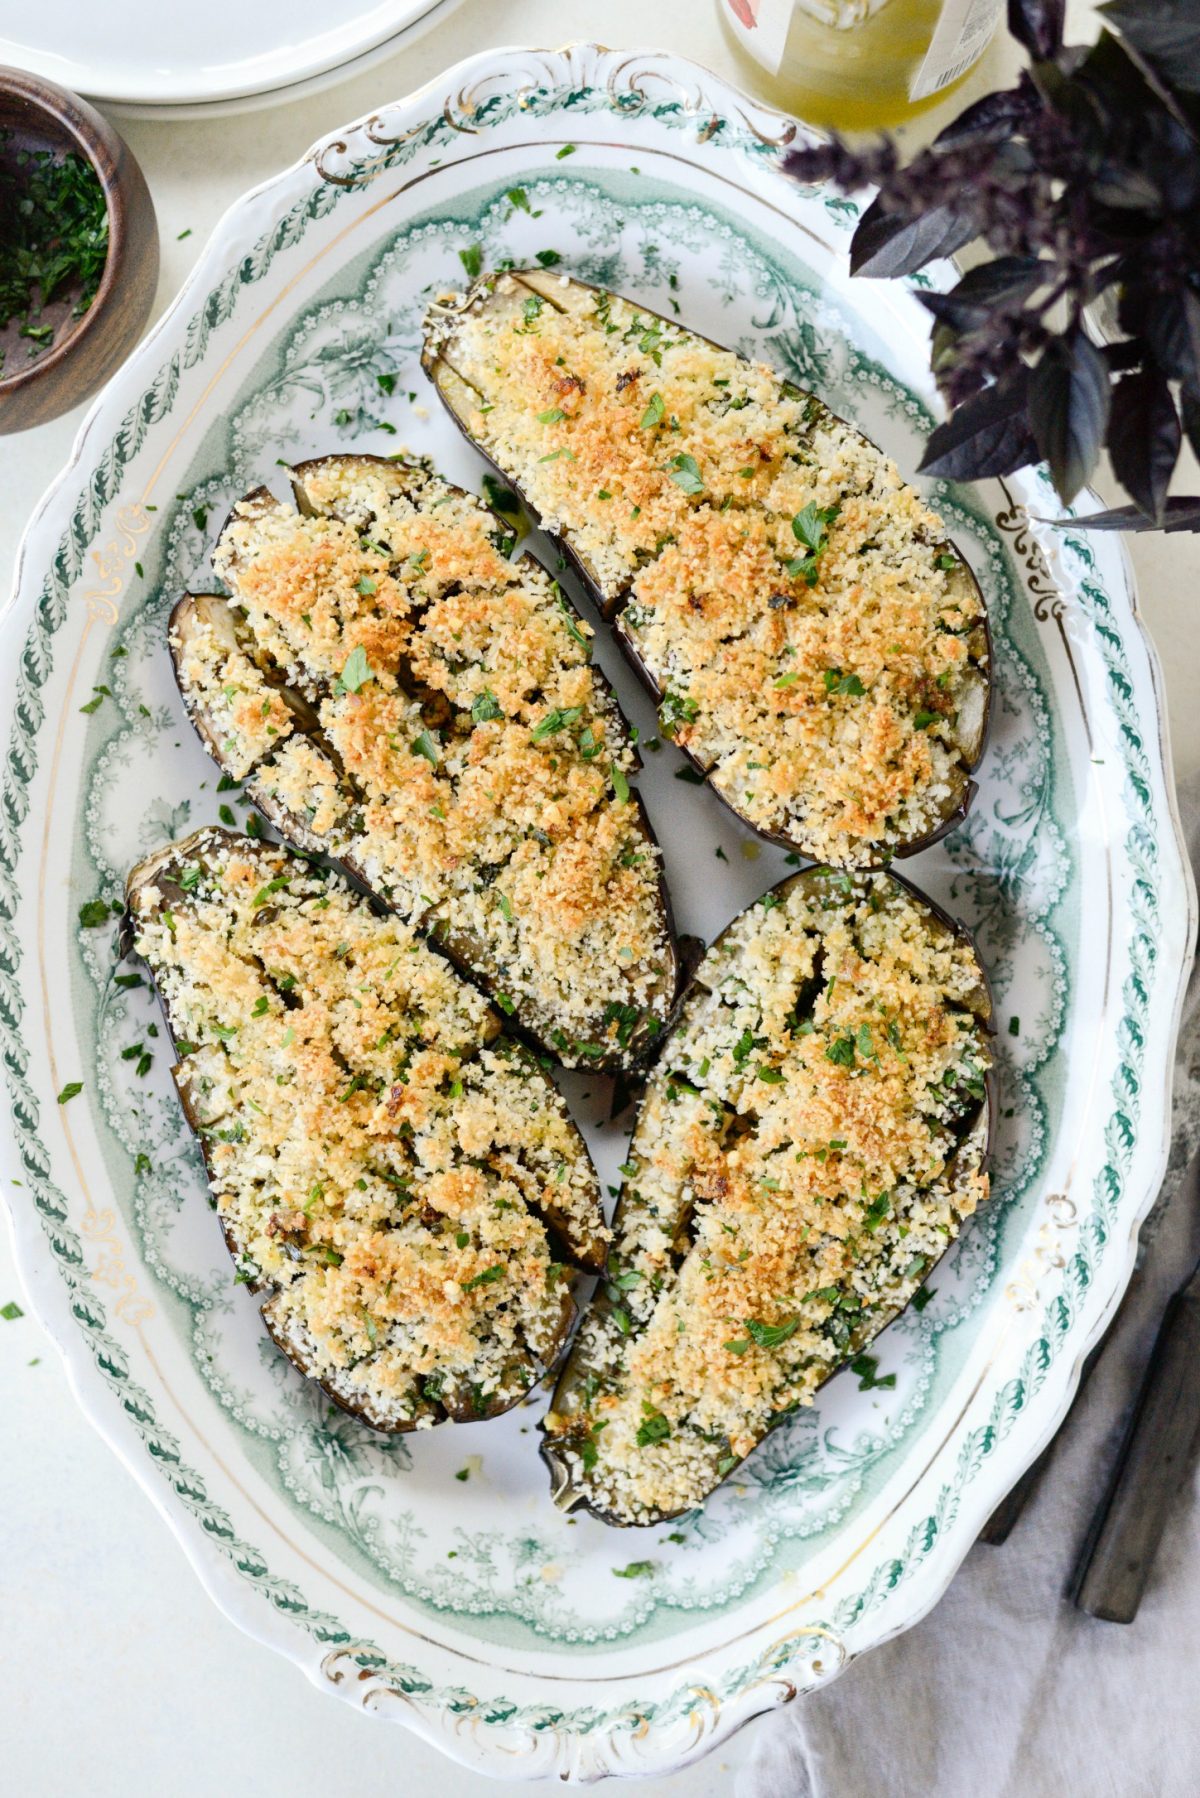 Baked Eggplant with Pecorino Crumbs l SimplyScratch.com (13)